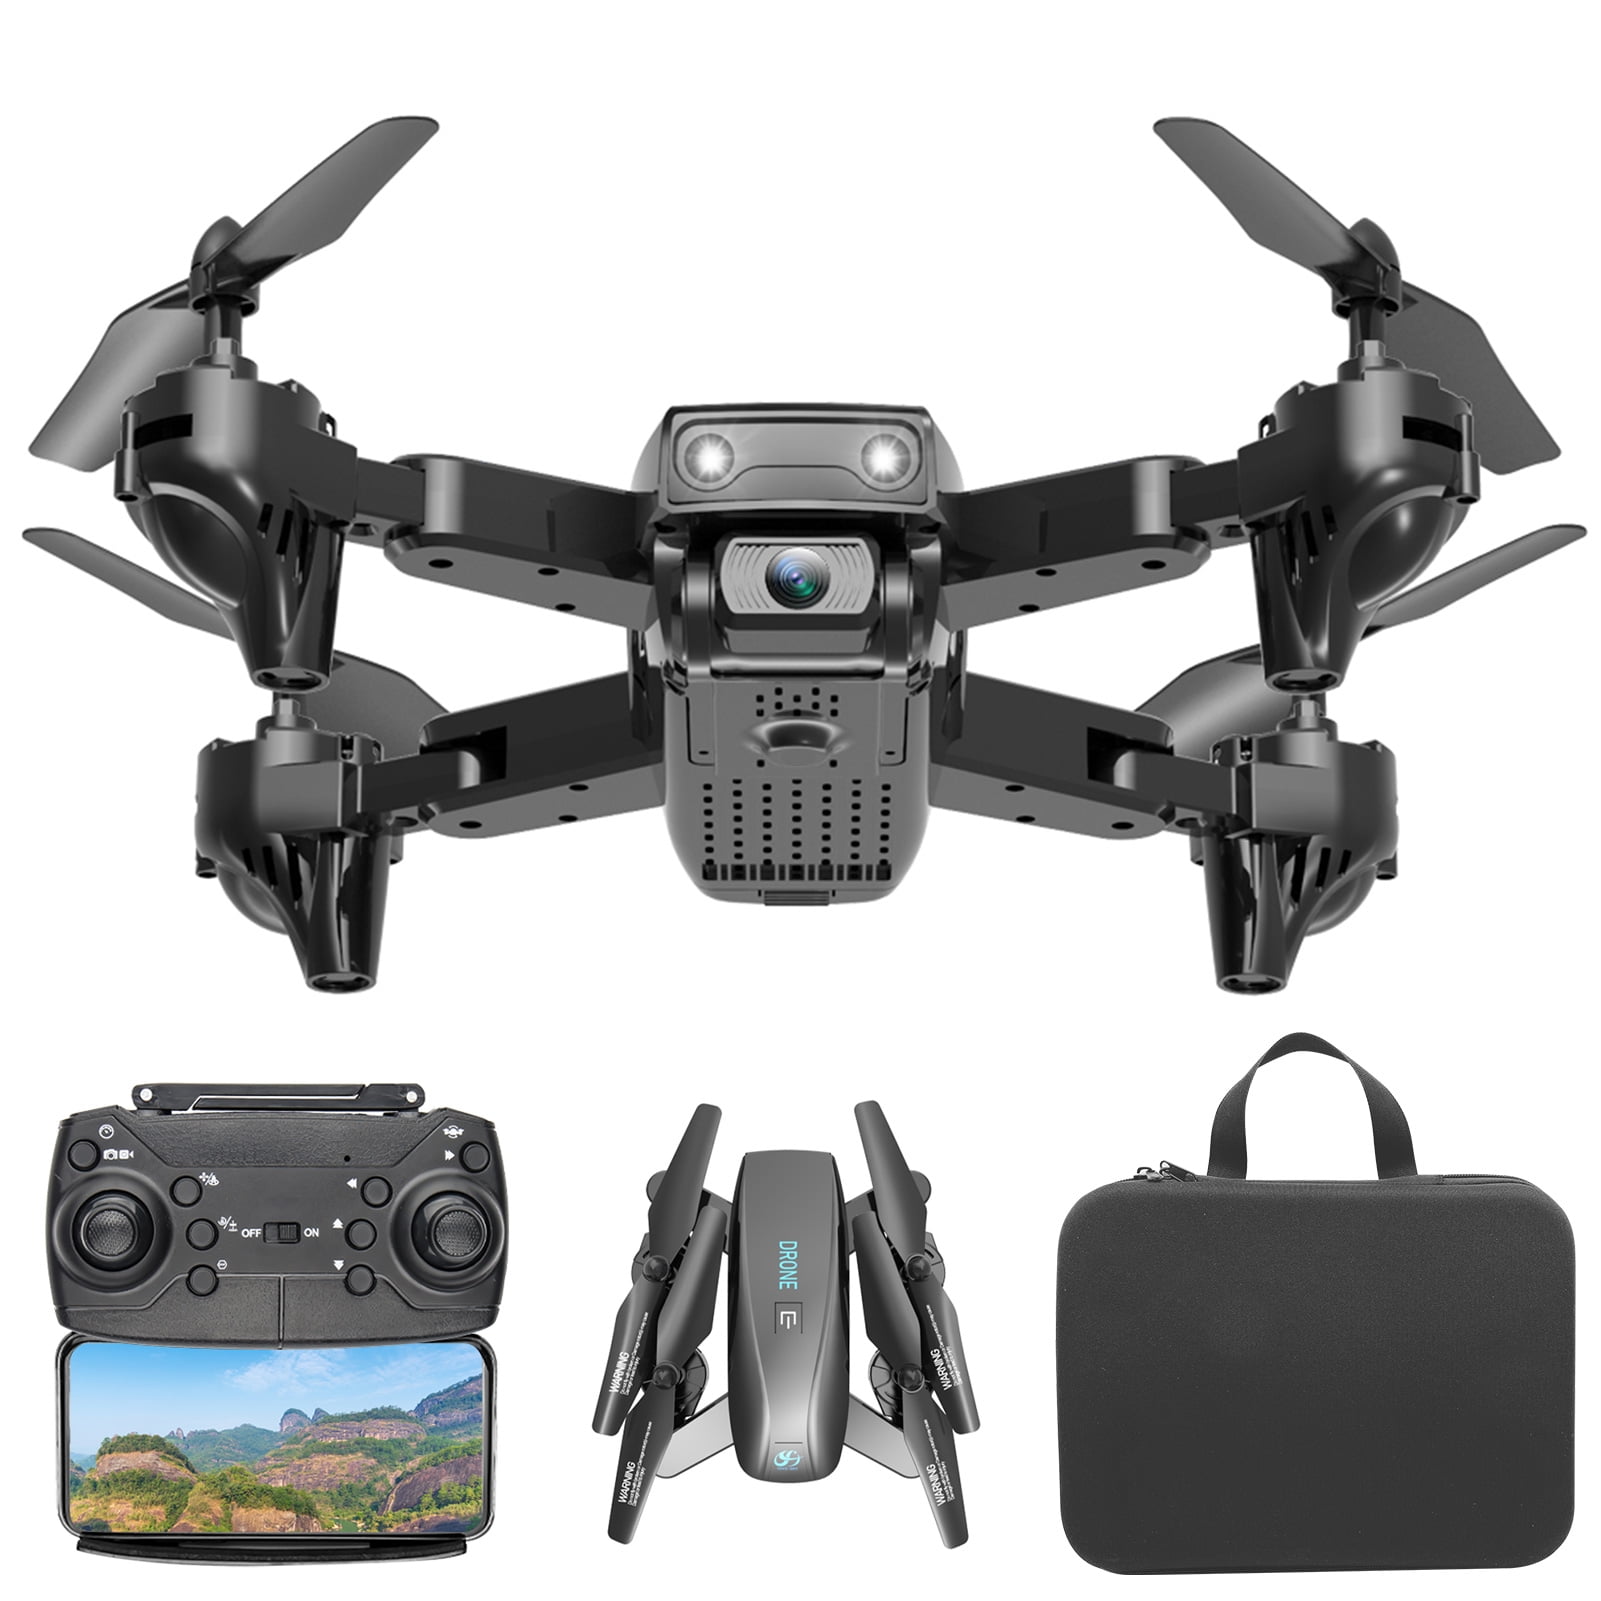 Details about   Profession Foldable RC Quadcopter Drone WIFI 1080P/4K HD Camera Photo e 